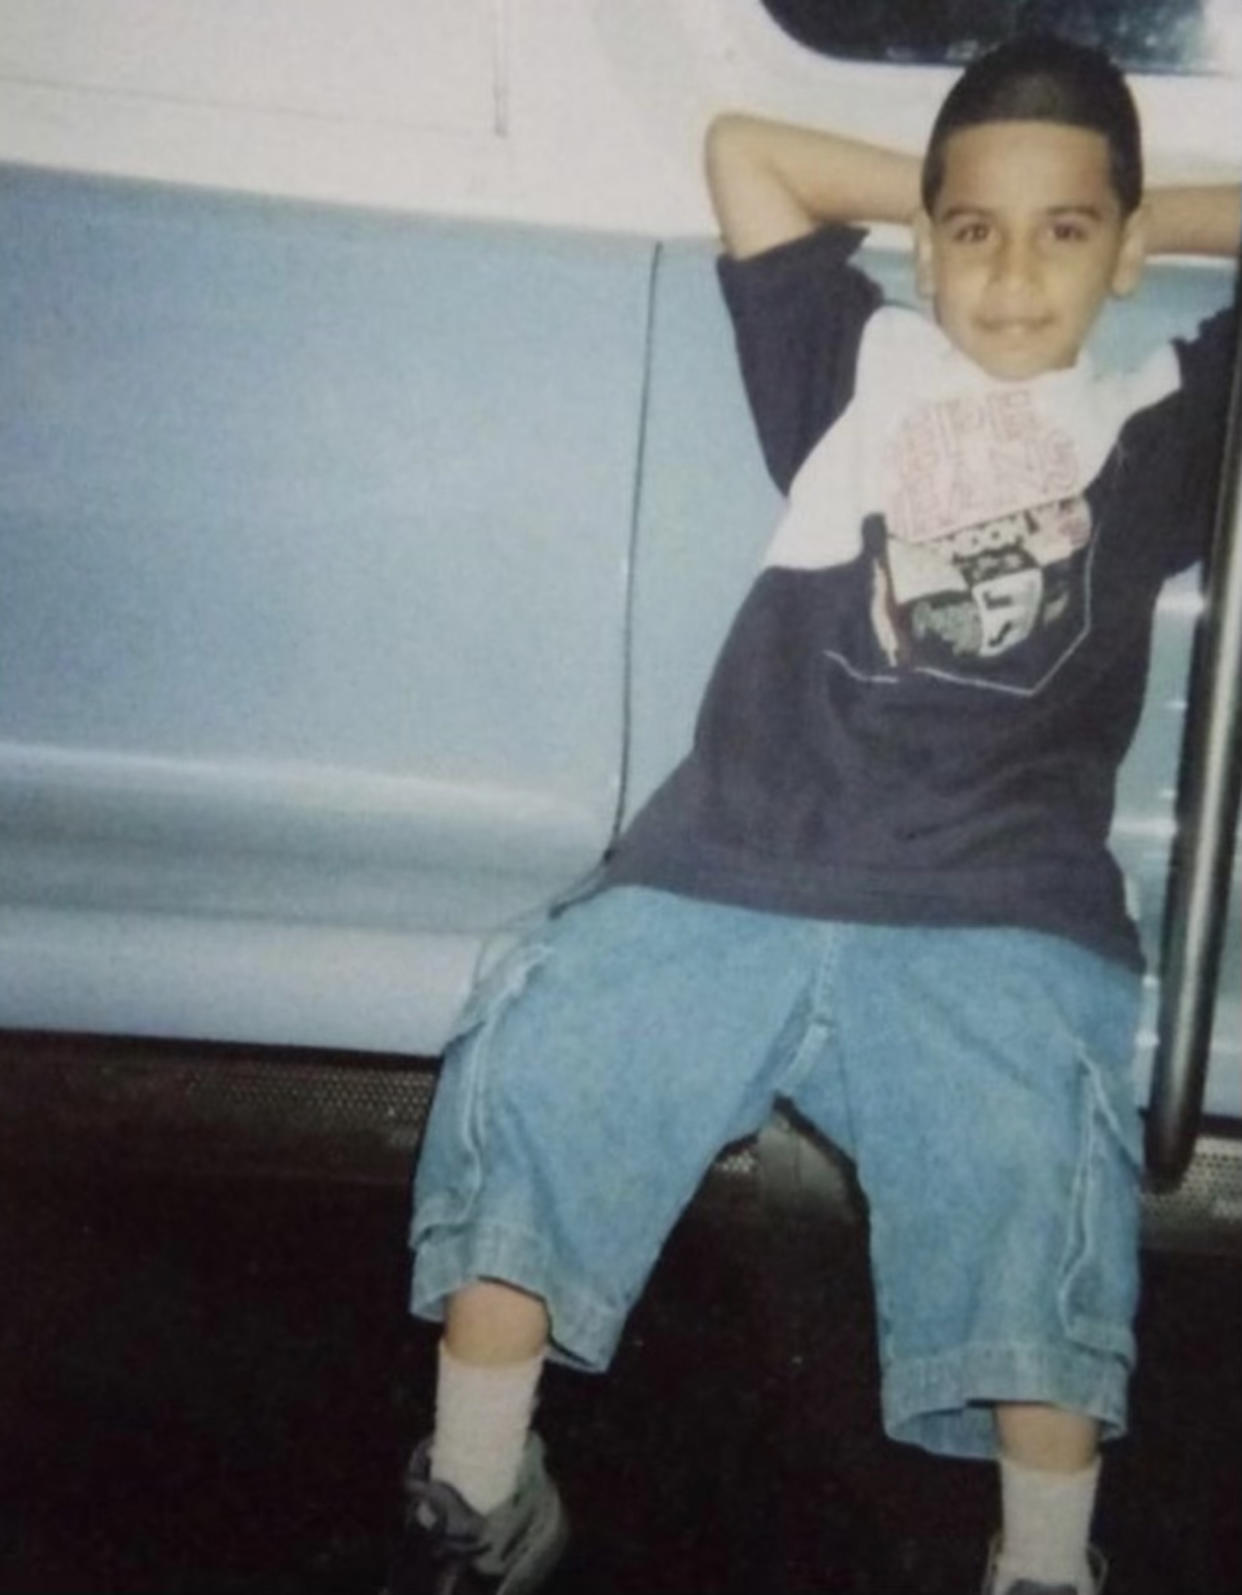 Rodriguez told TODAY he's wanted to be an artist since he was a young boy. He's pictured here at age 7 riding a subway car in New York City.  (Courtesy Devon Rodriguez)